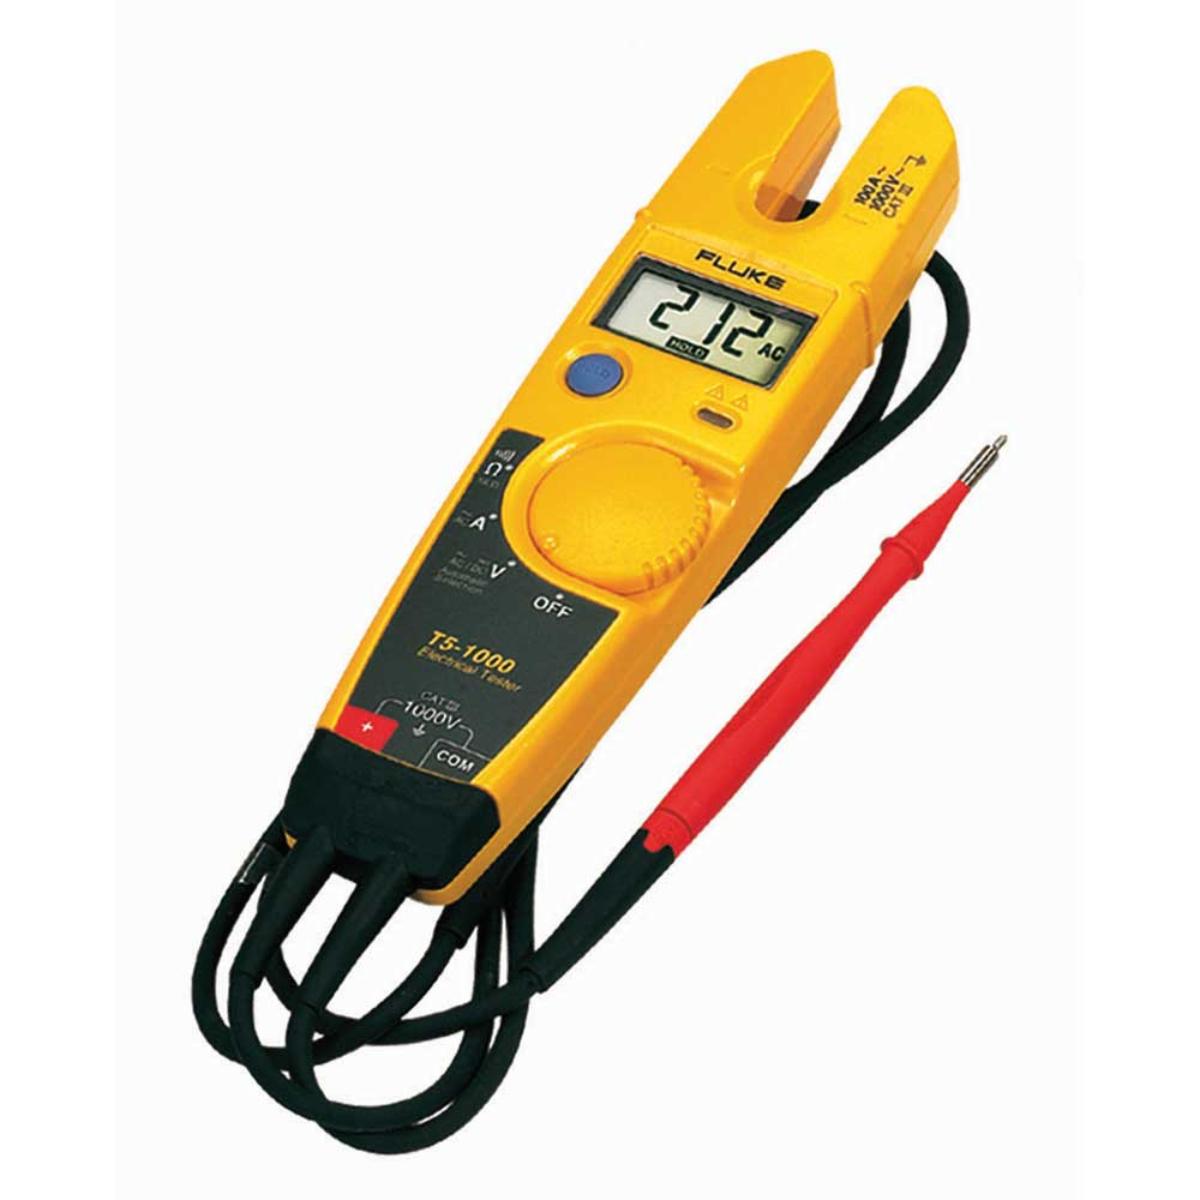 VOLTAGE CONTINUITY & CURRENT TESTER